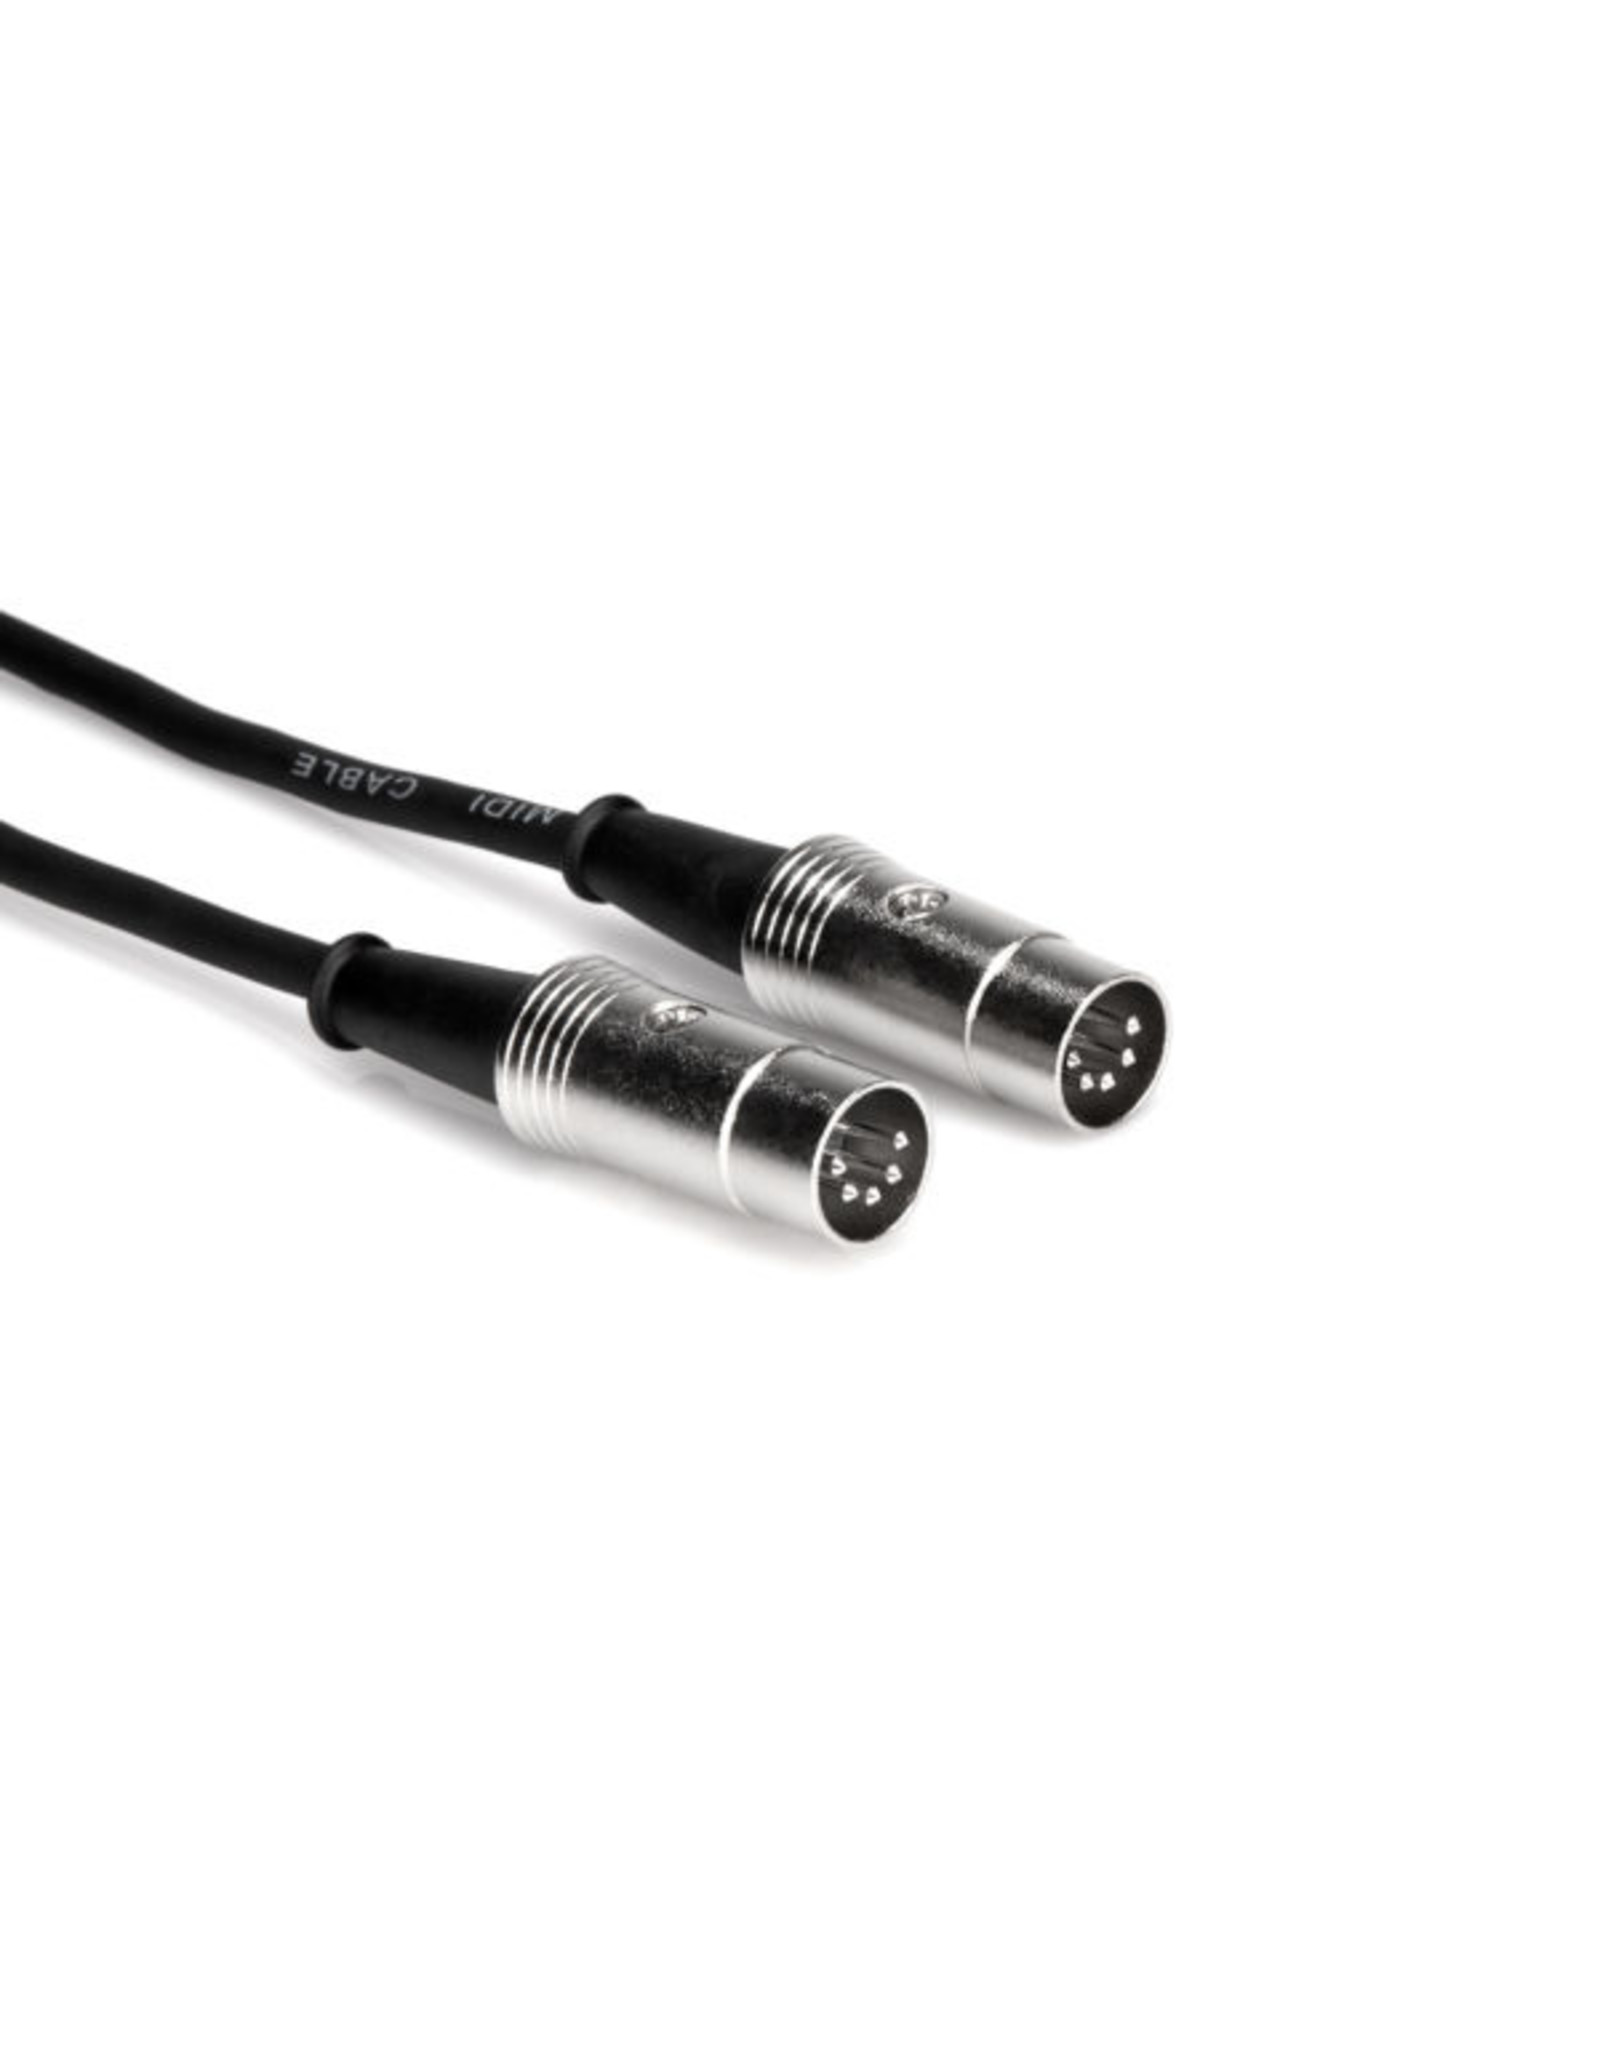 Hosa Pro MIDI Cable 5ft, 5 pin DIN to Same